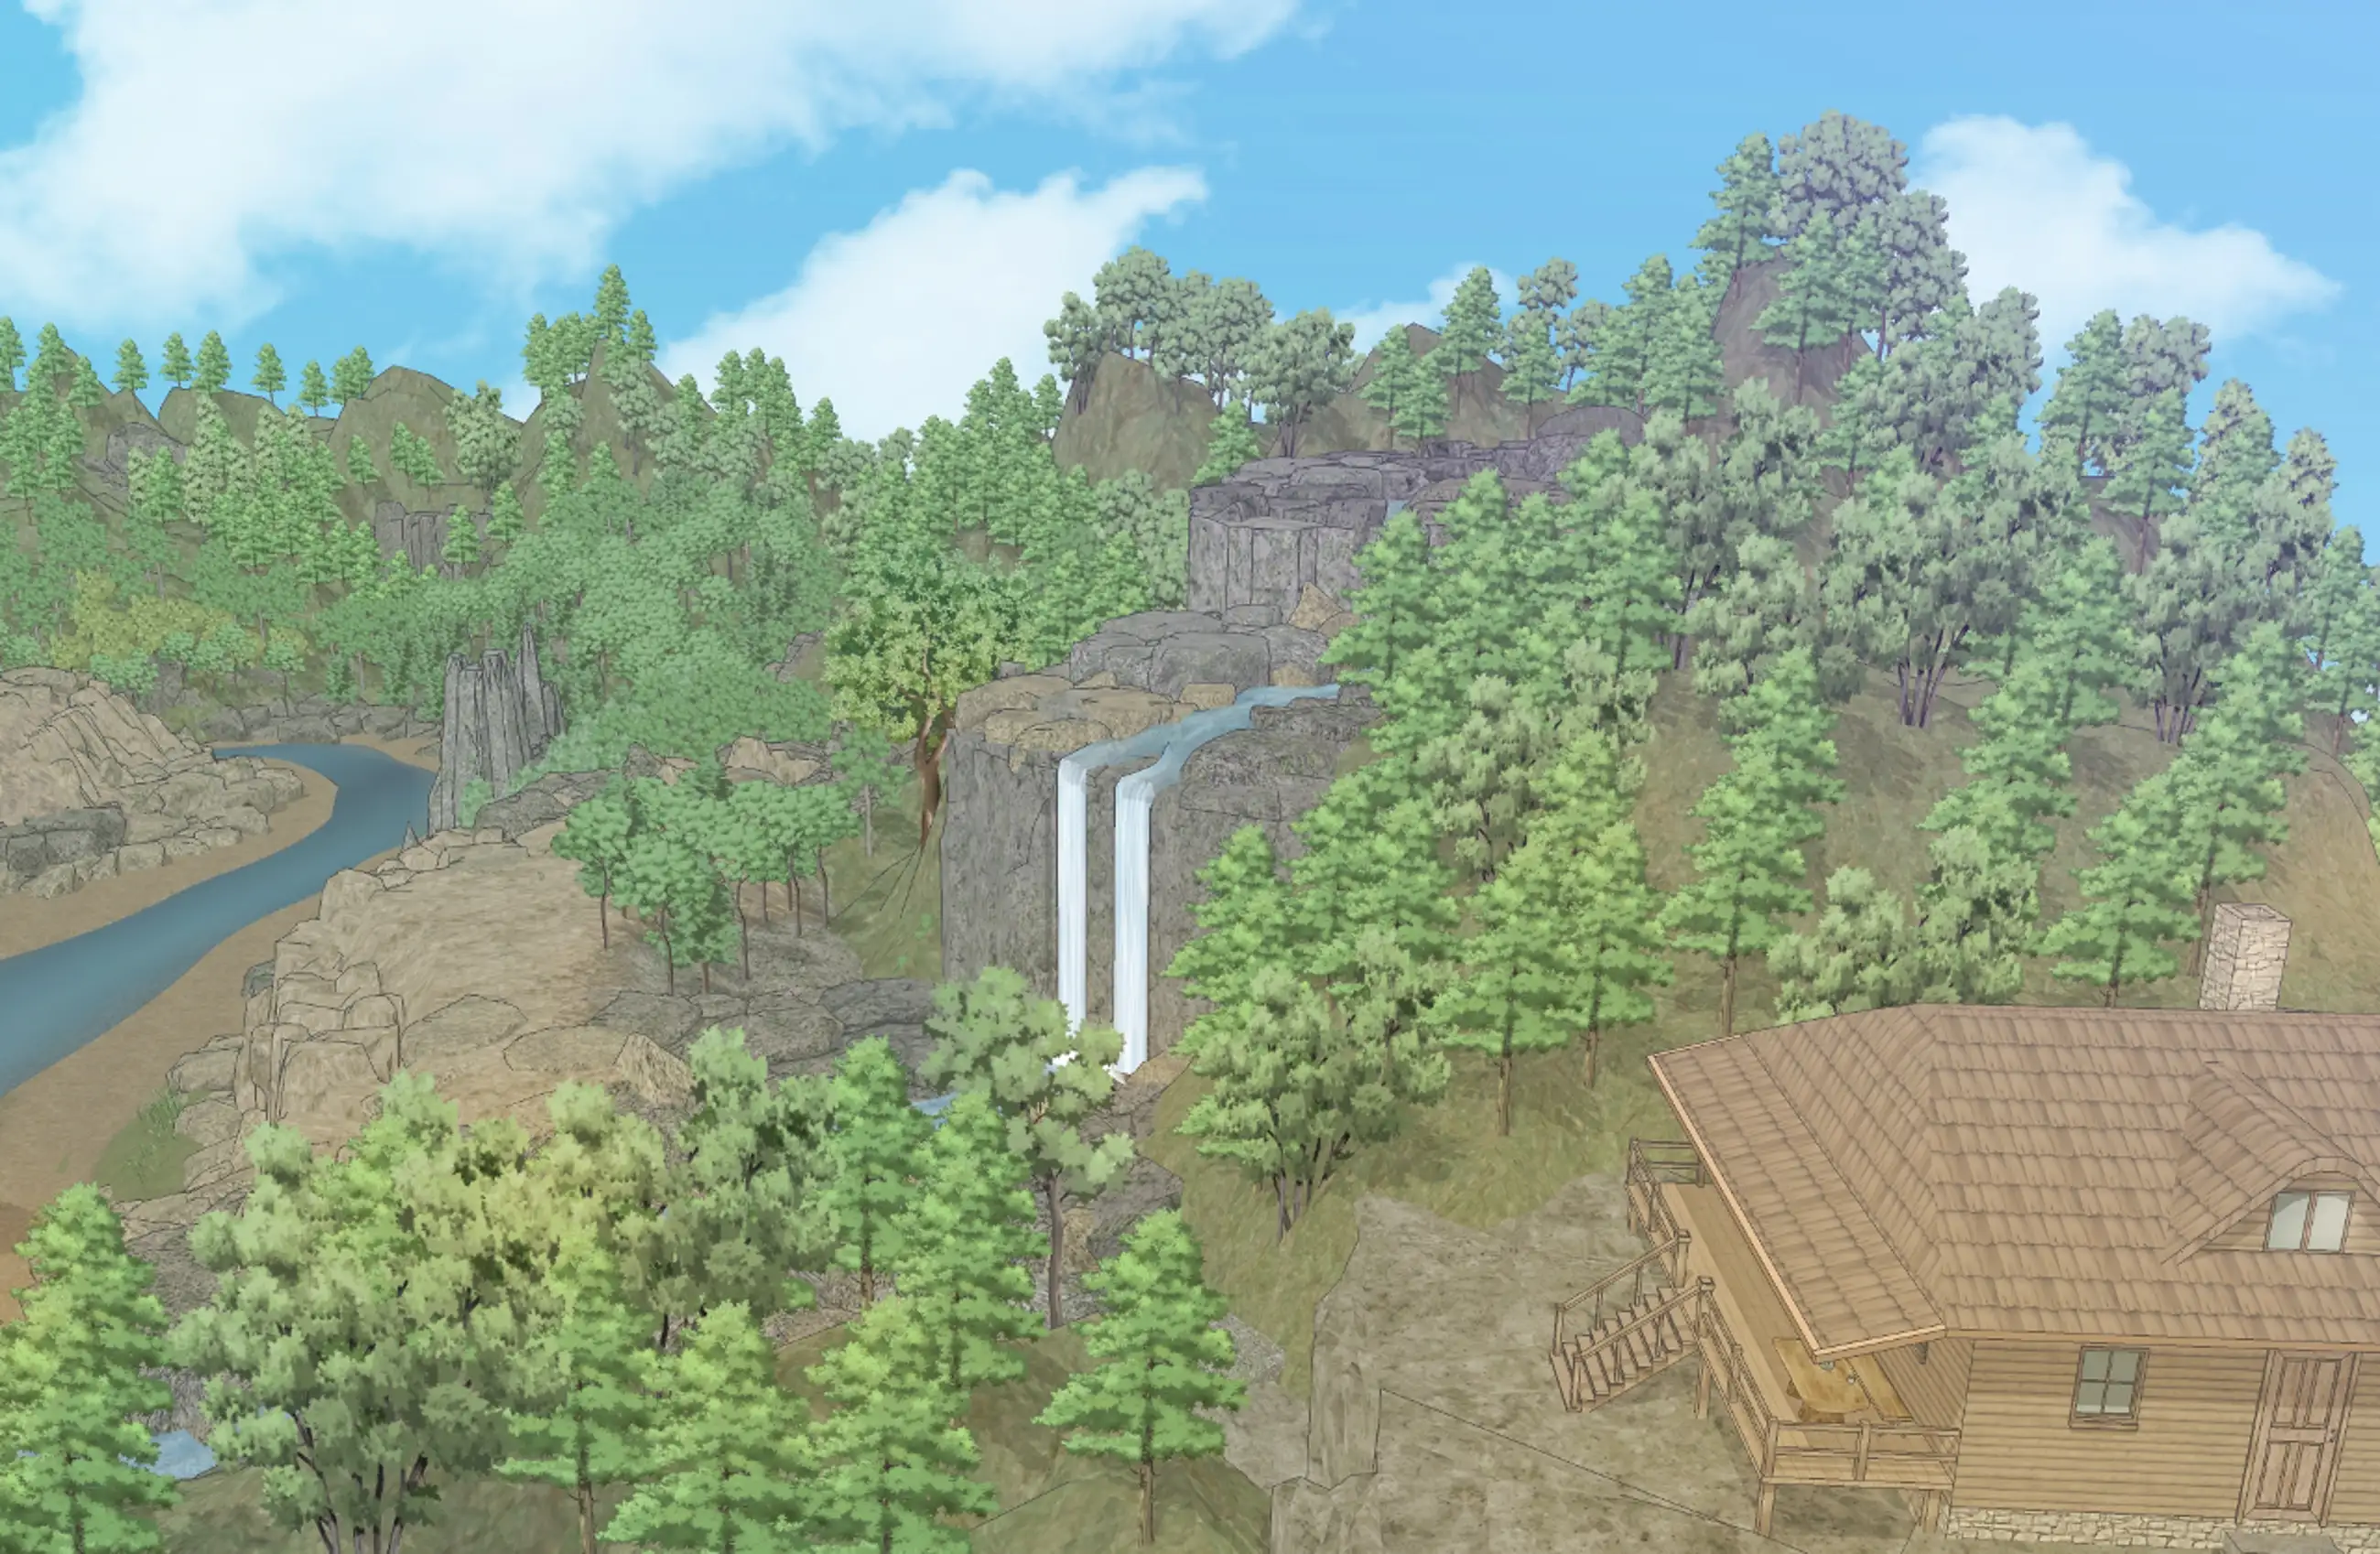 Waterfall & mountain forest